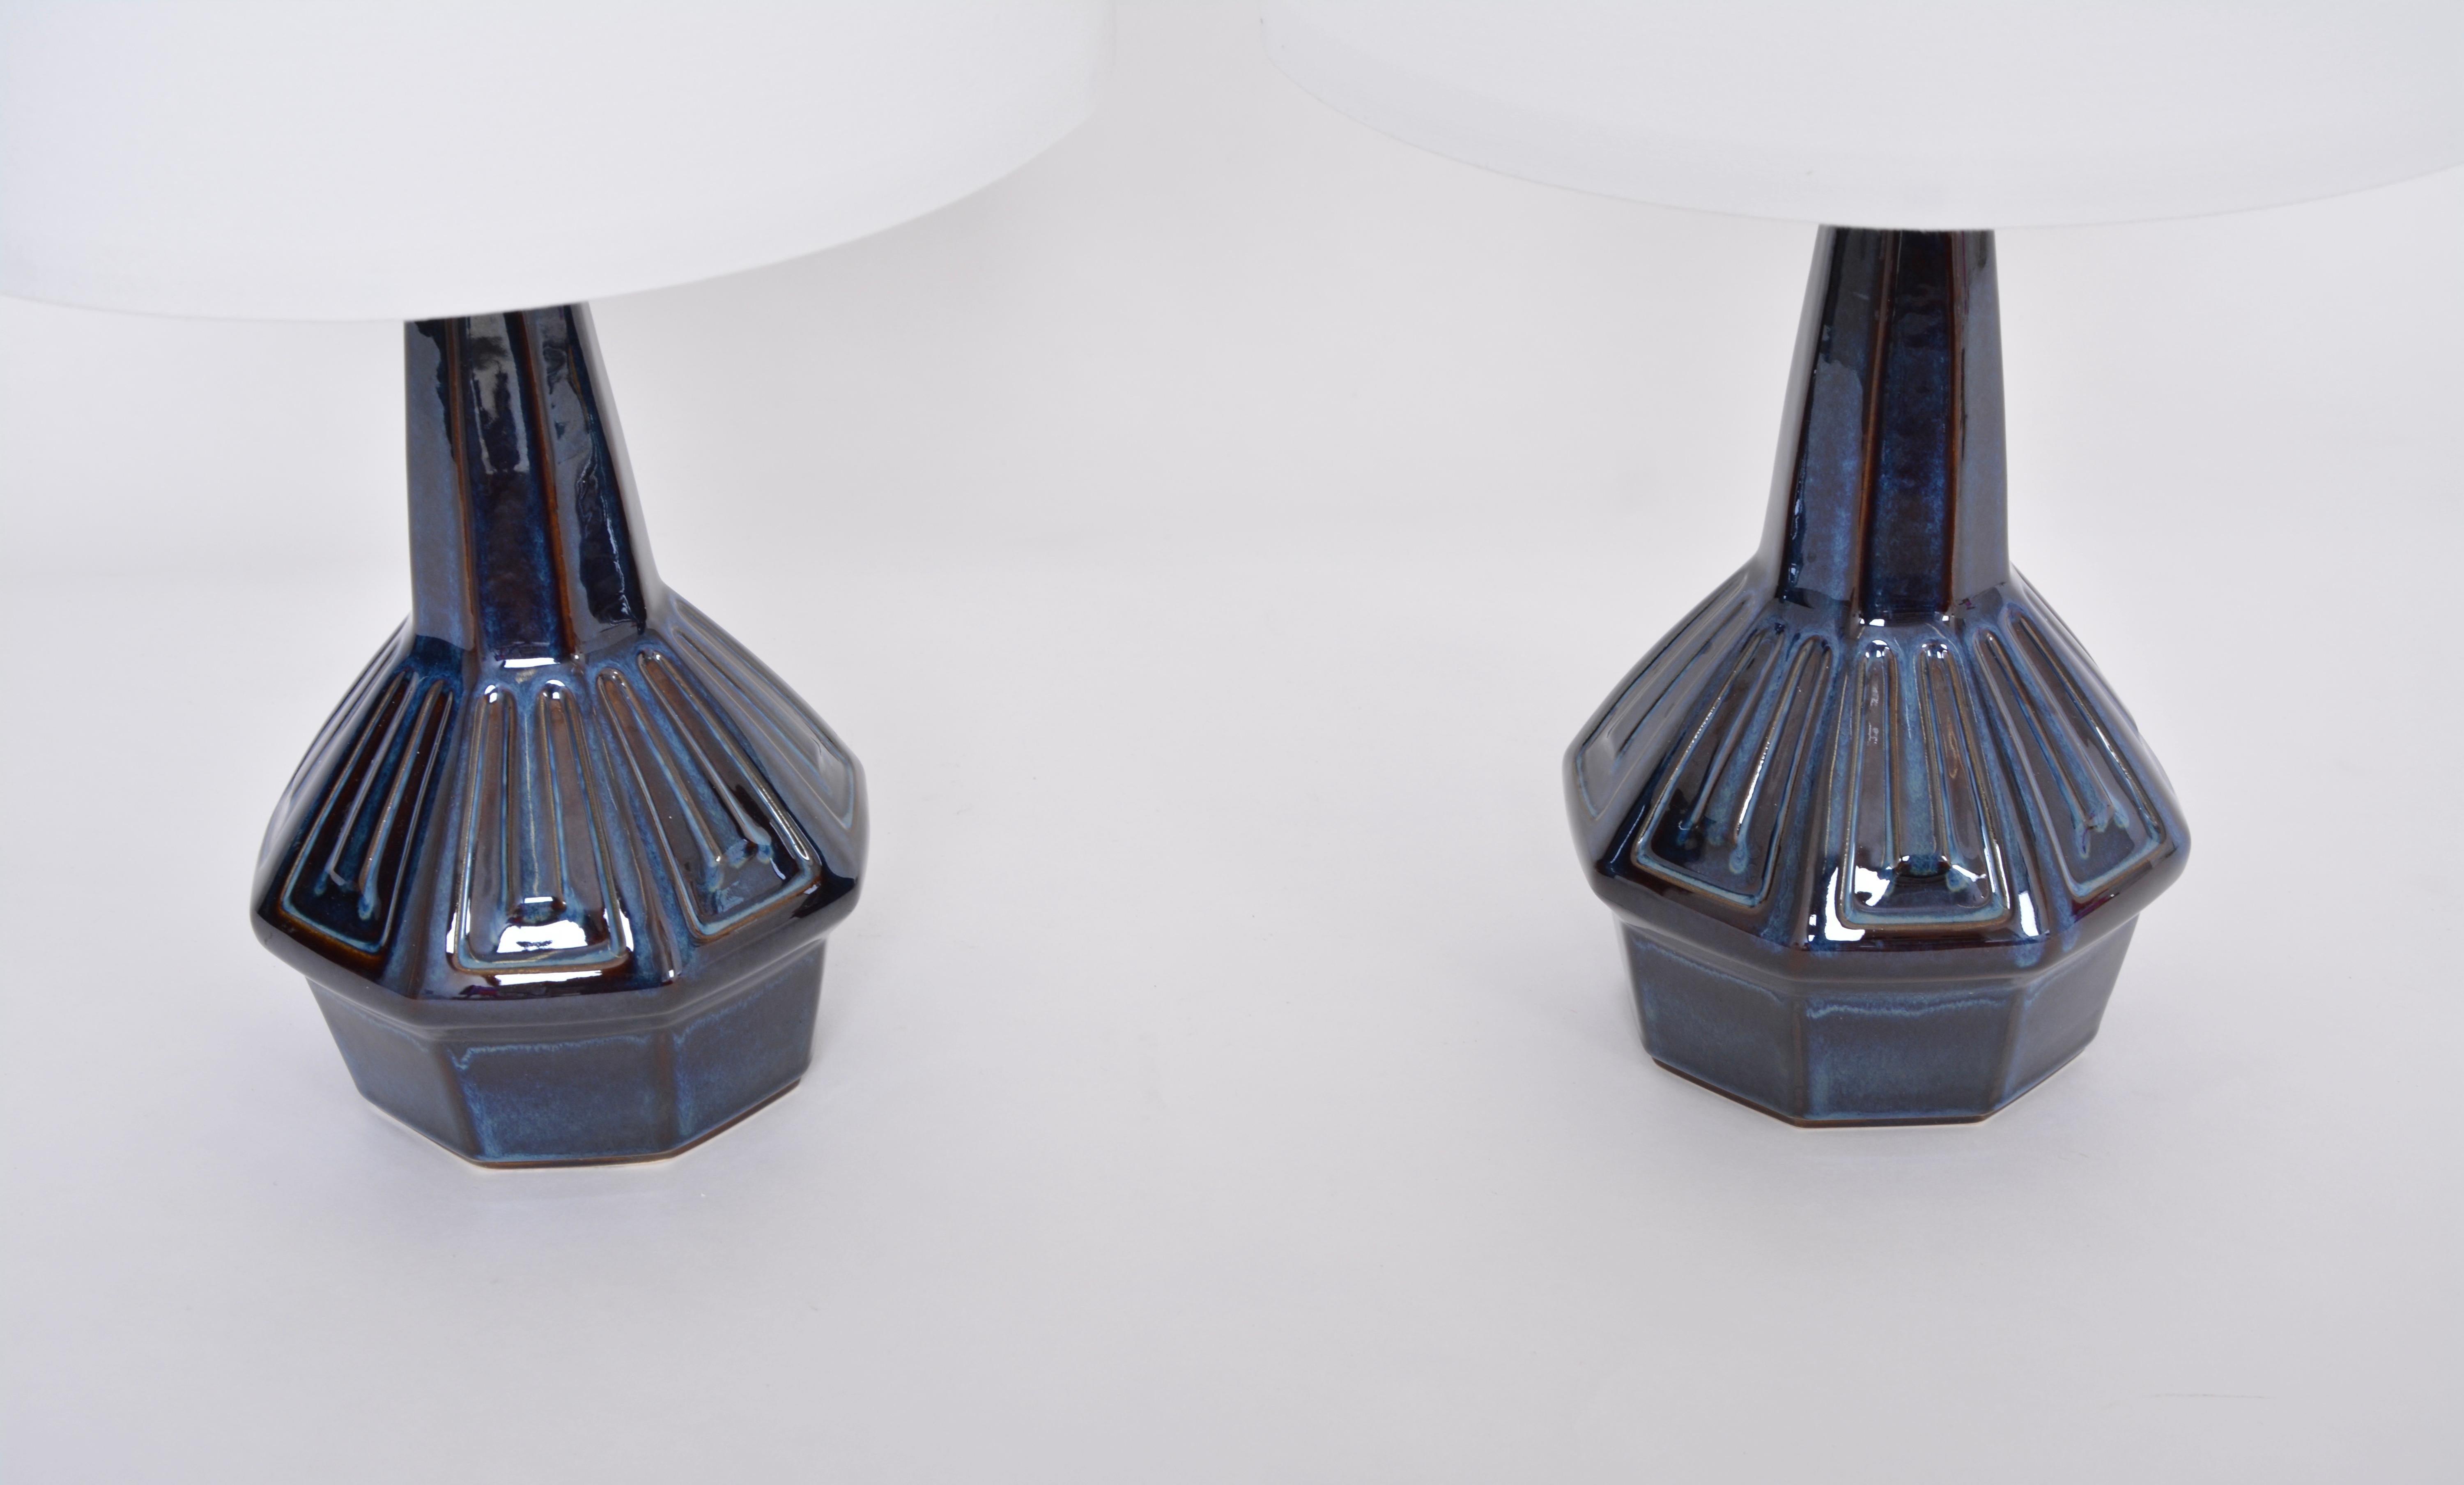 Pair of Blue midcentury Table Lamps Model 1055 by Einar Johansen for Soholm

Pair of ceramic table lamps designed by Einar Johansen and produced by Danish company Soholm Stentoj probably in the 1960s. The lamp's base are made of stoneware and are